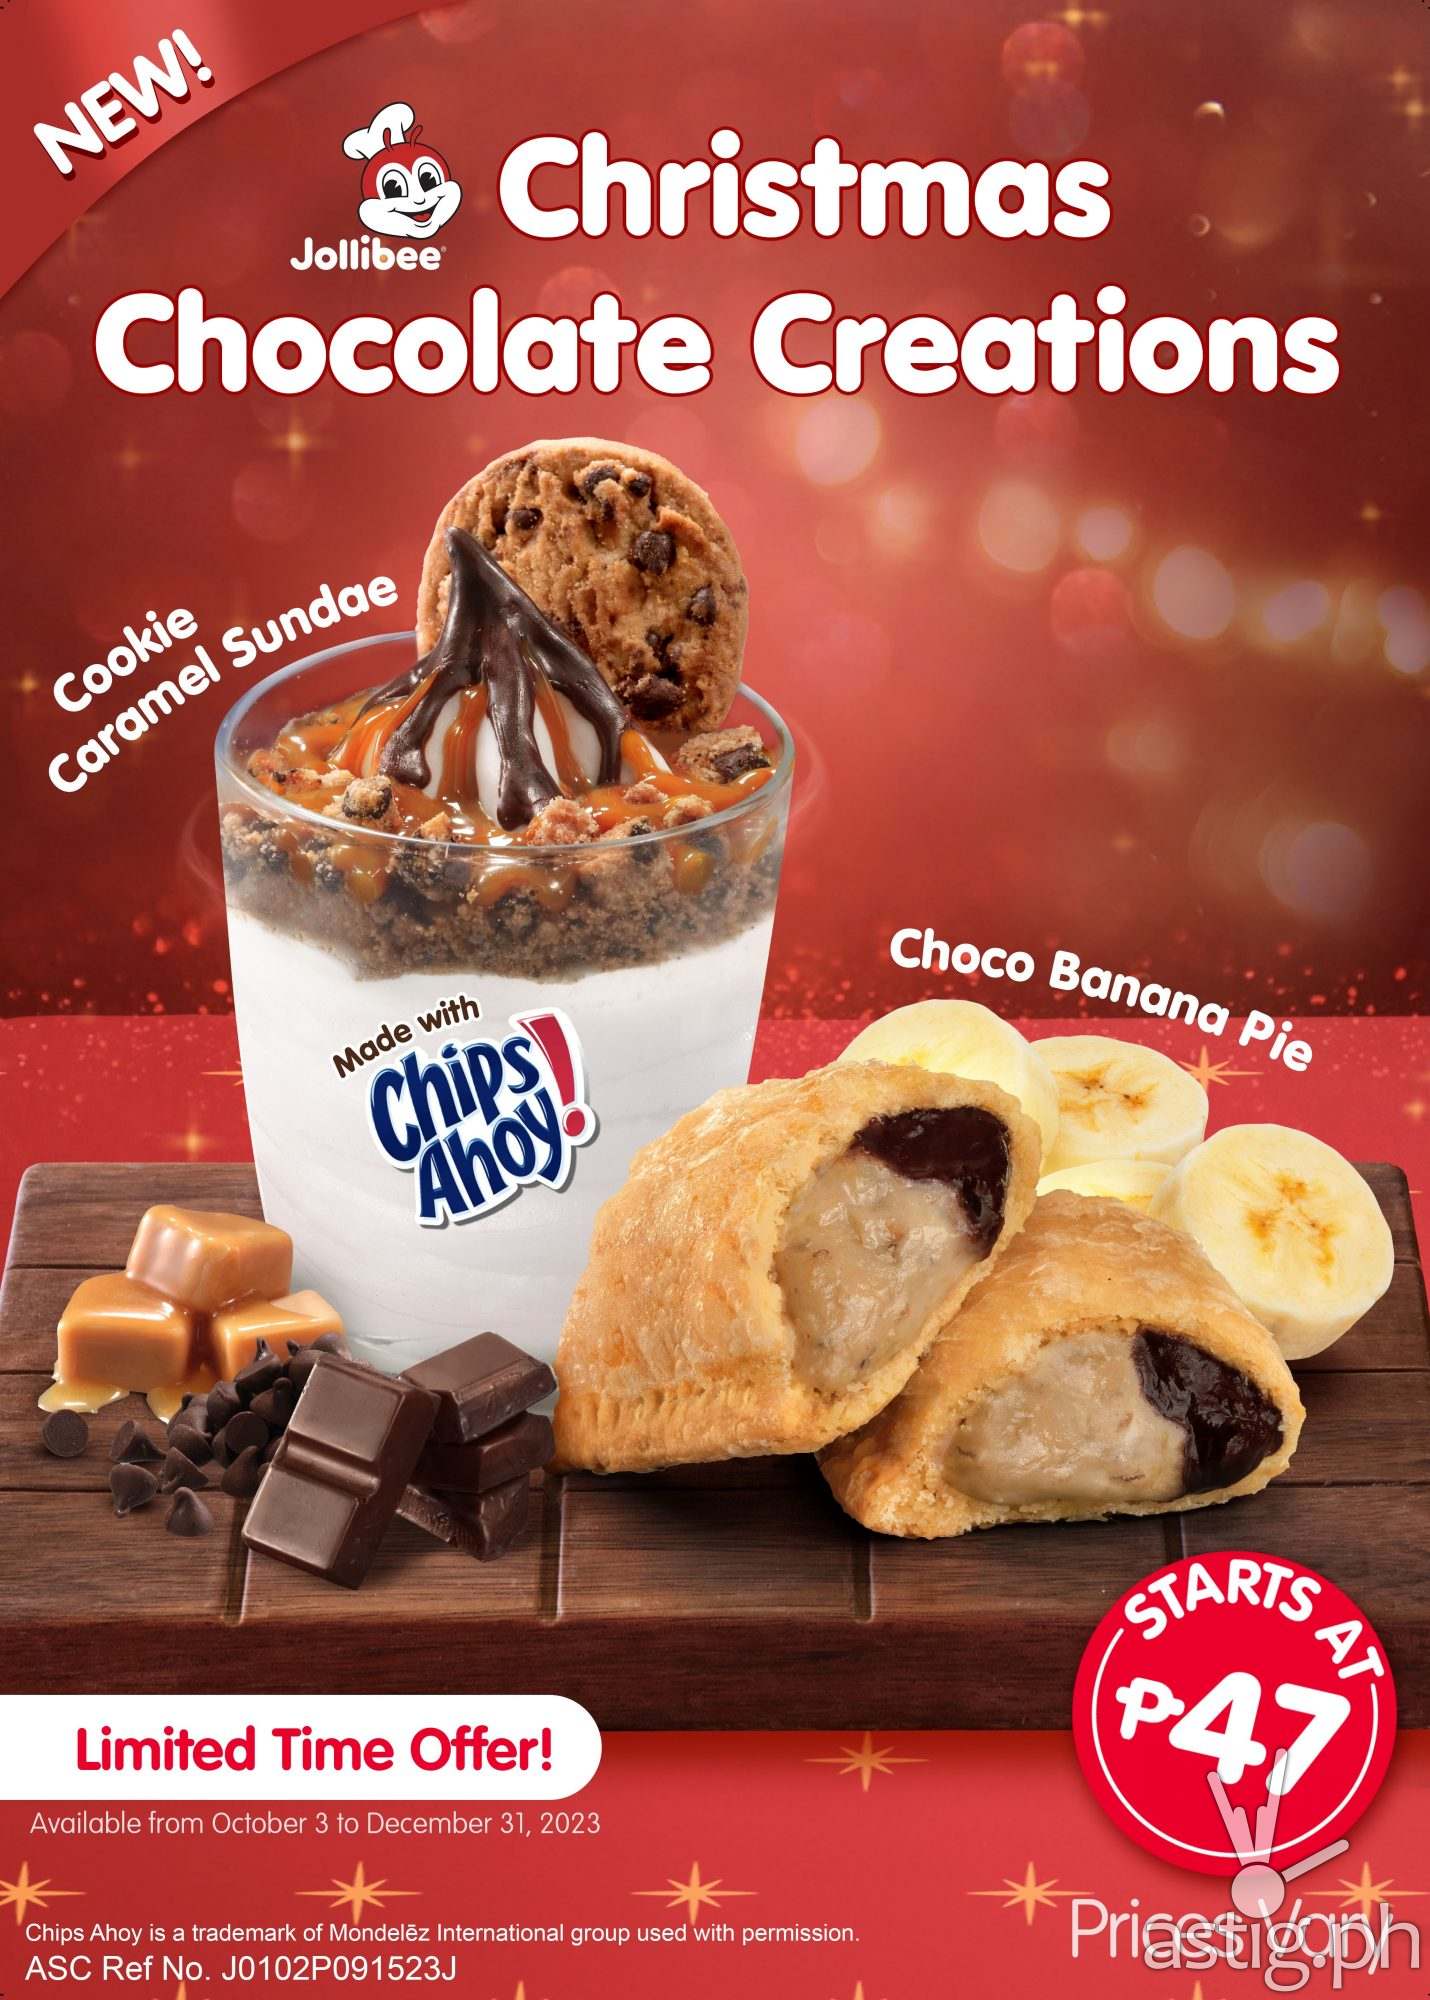 LOOK: Jollibee's new Choco Banana Pie and Cookie Caramel Sundae are the best deserts you can try this Christmas